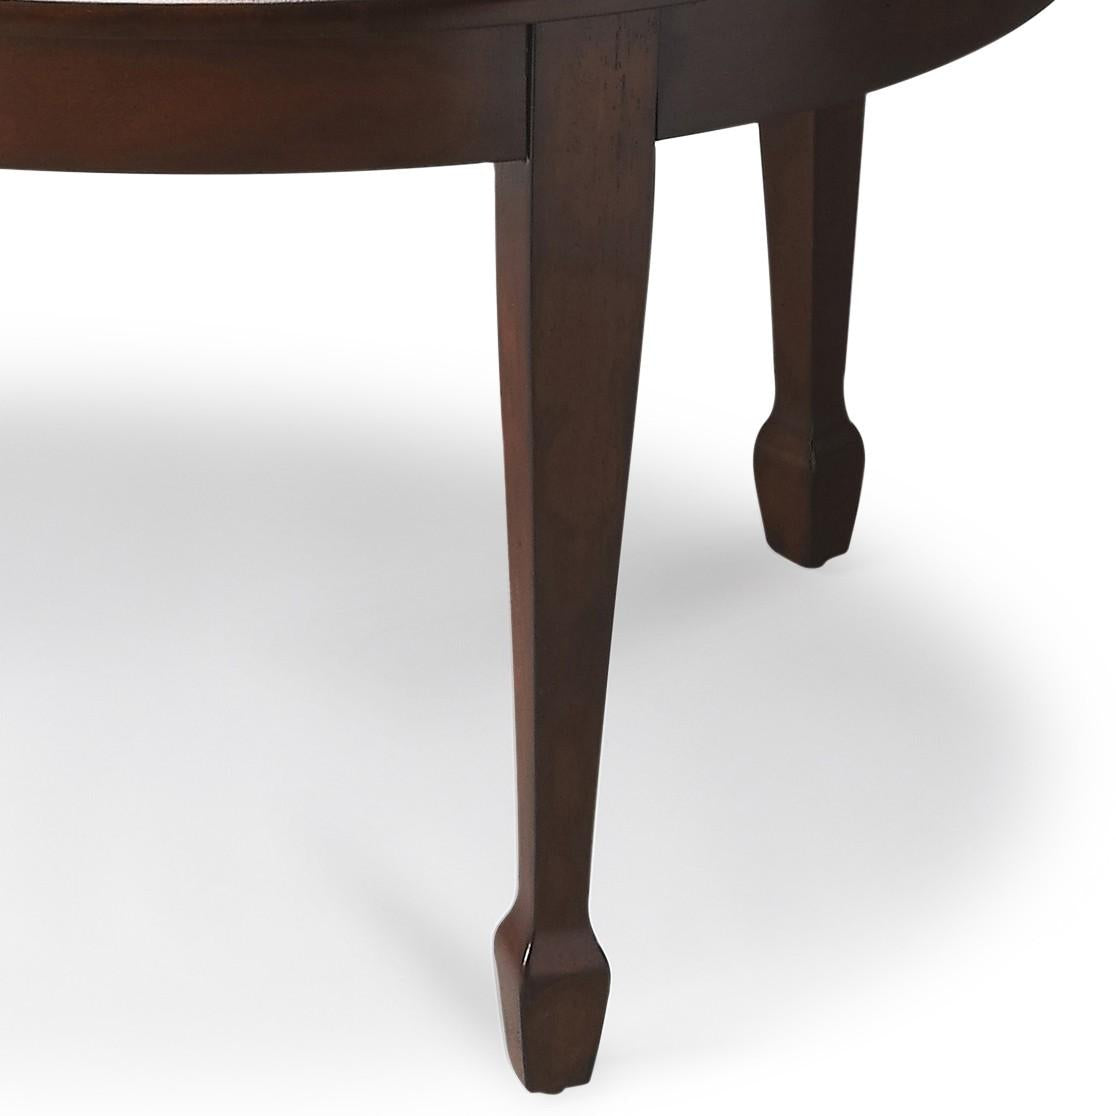 Traditional Cherry Oval Coffee Table